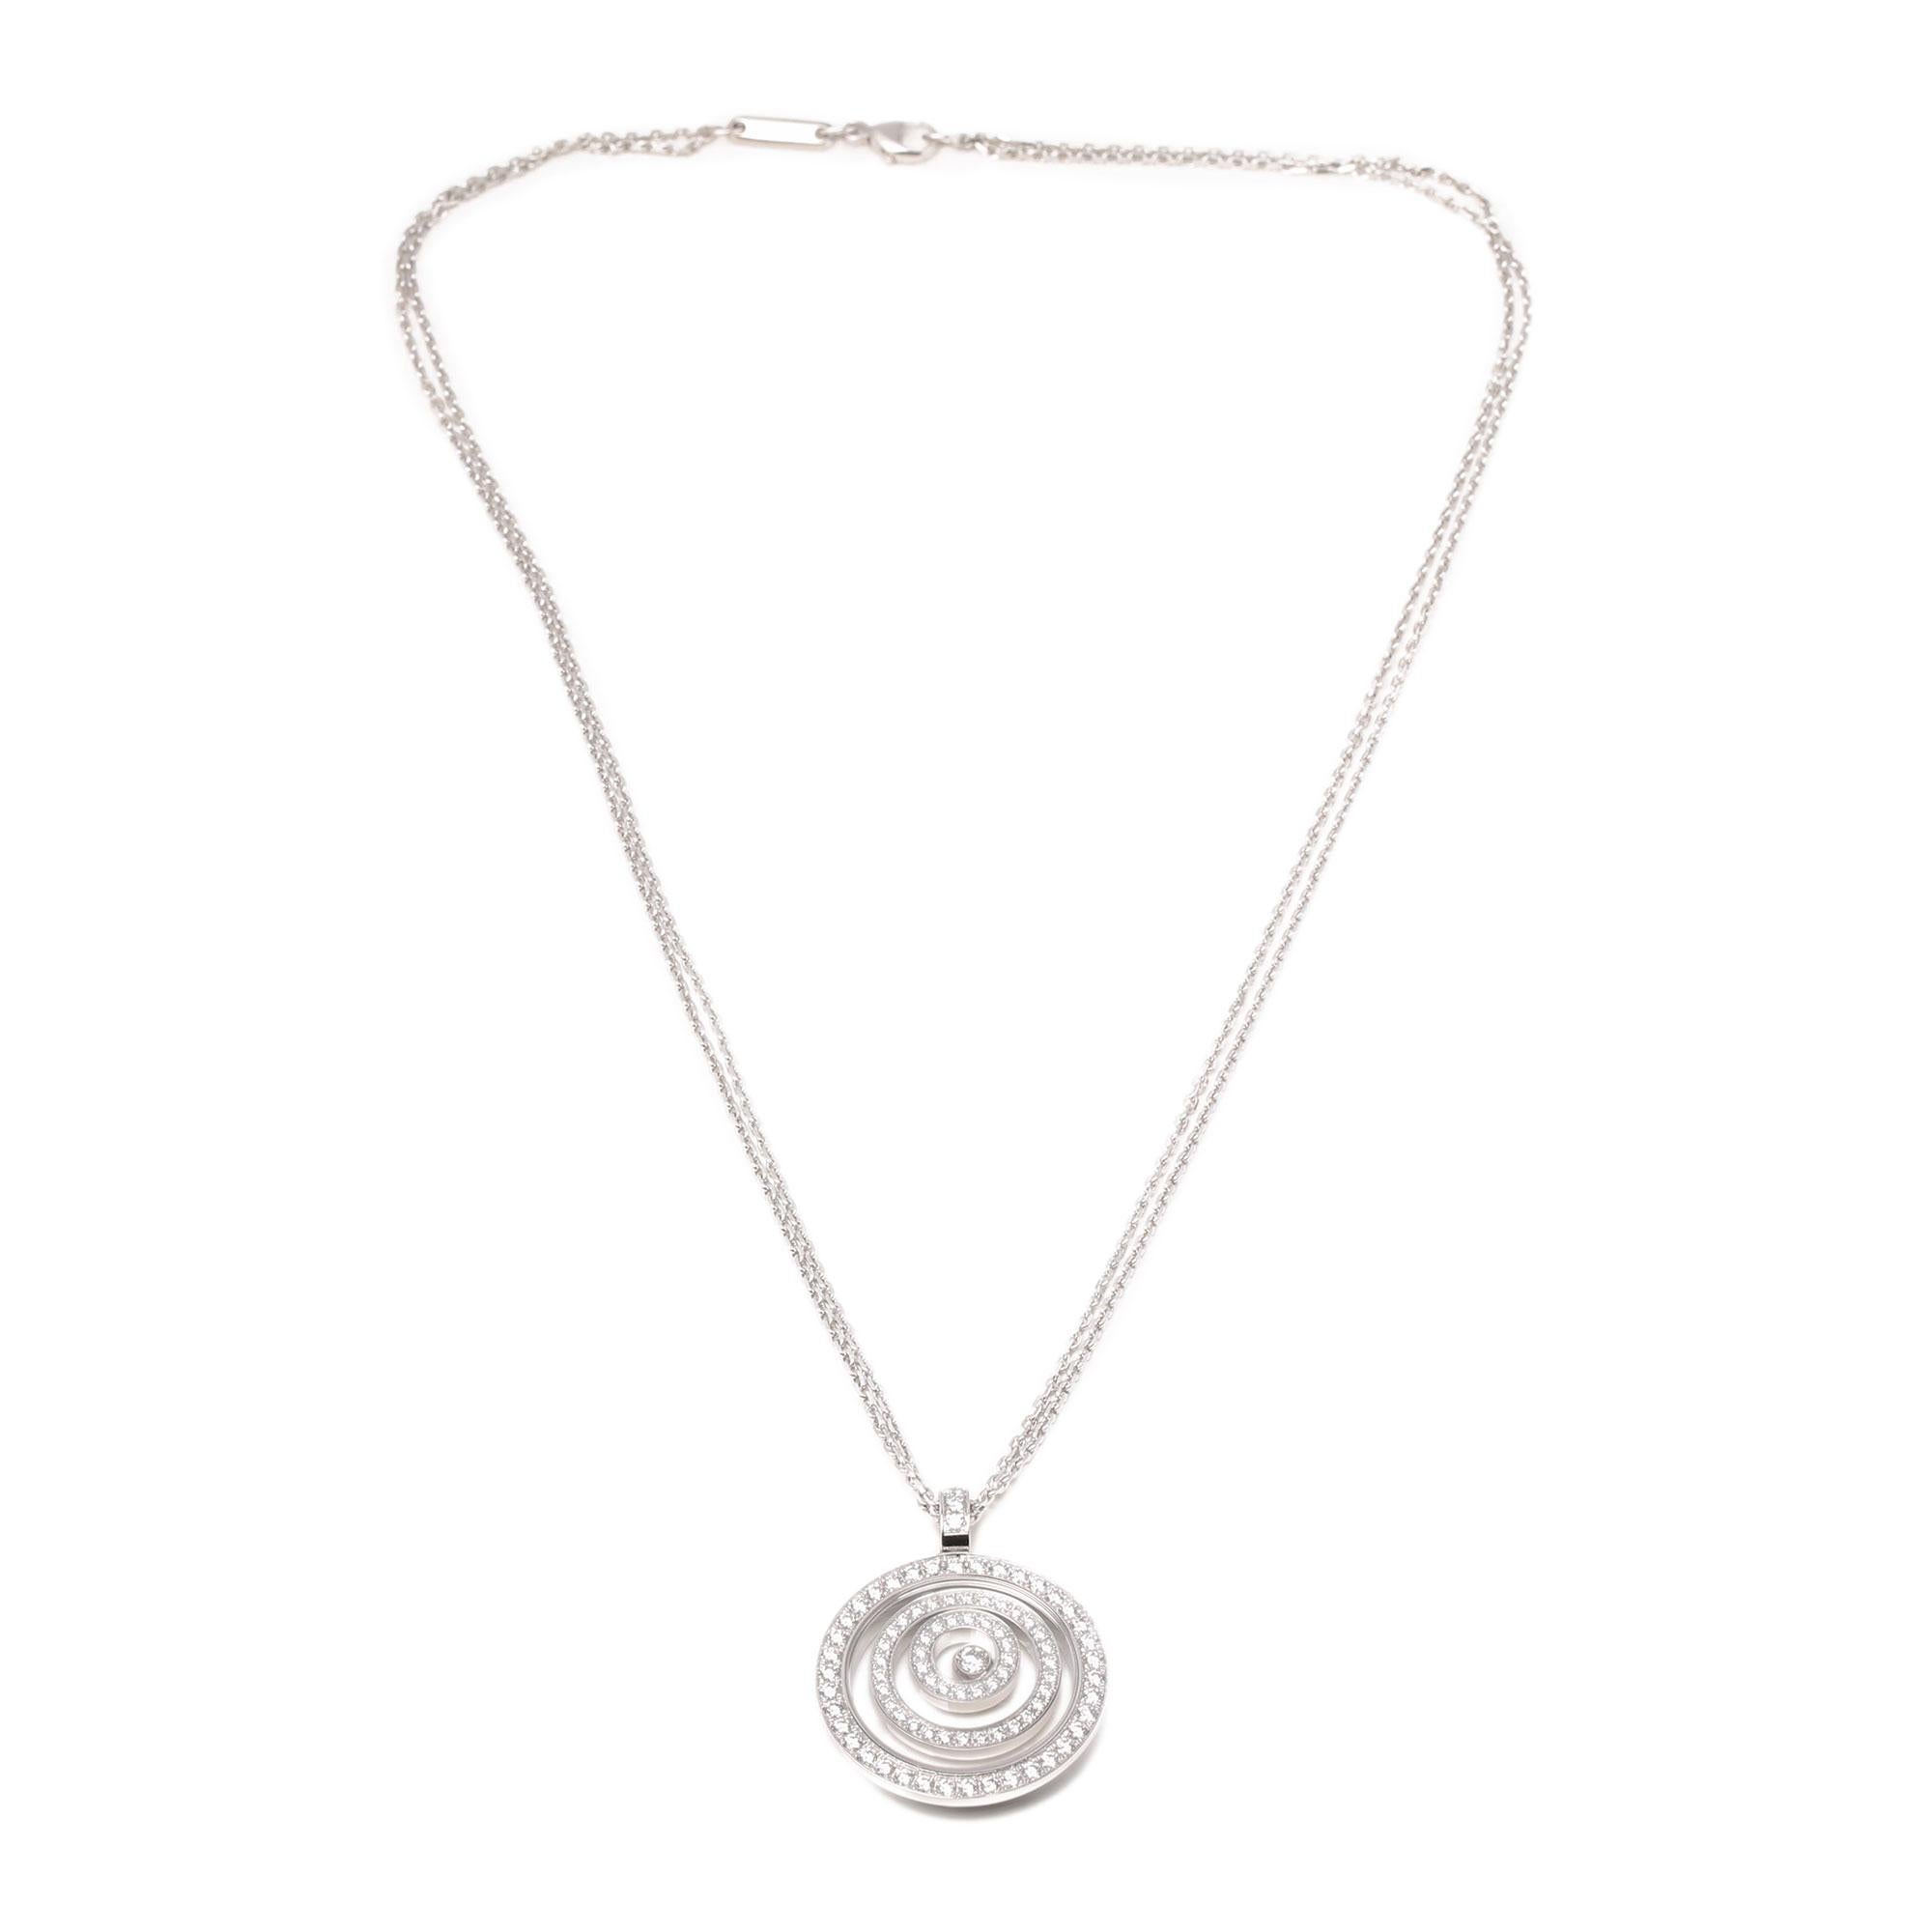 This necklace by Chopard is from their Happy Spirit collection and features three circles of diamonds, with one happy floating diamond between sapphire crystal all made in an 18ct white gold setting. Complete with a Xupes presentation box. Our Xupes